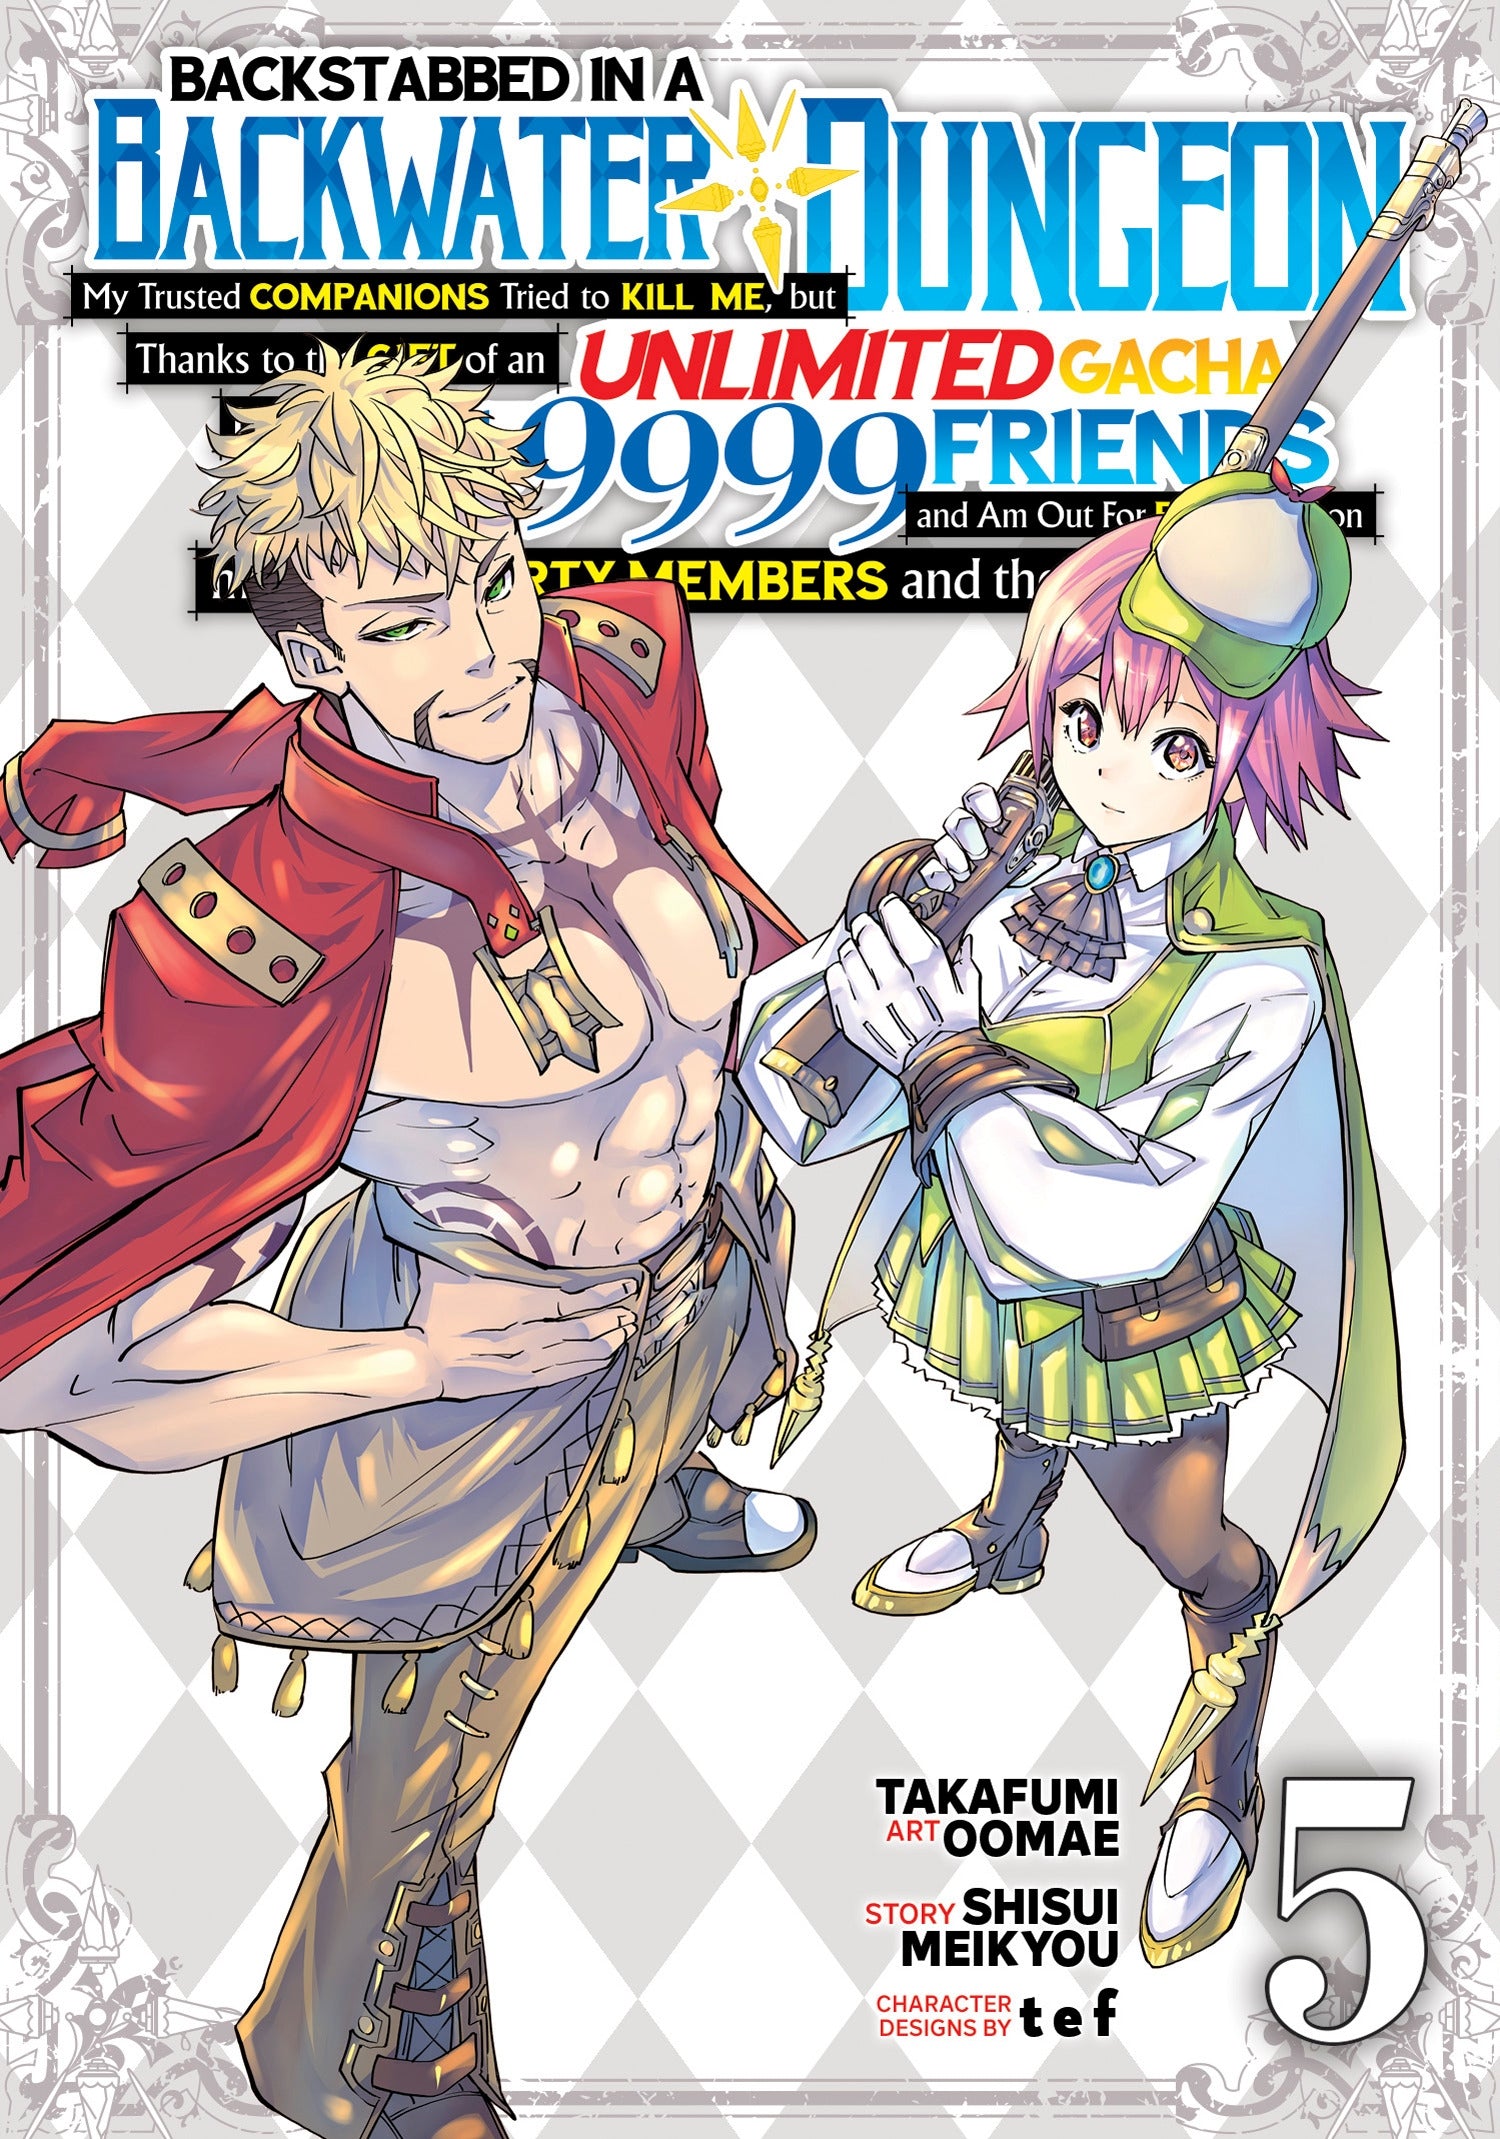 Backstabbed In A Backwater Dungeon: My Party Tried to Kill Me, But Thanks to an Infinite Gacha I Got LVL 9999 Friends and Am Out For Revenge (Manga), Vol. 5 **Pre-Order**